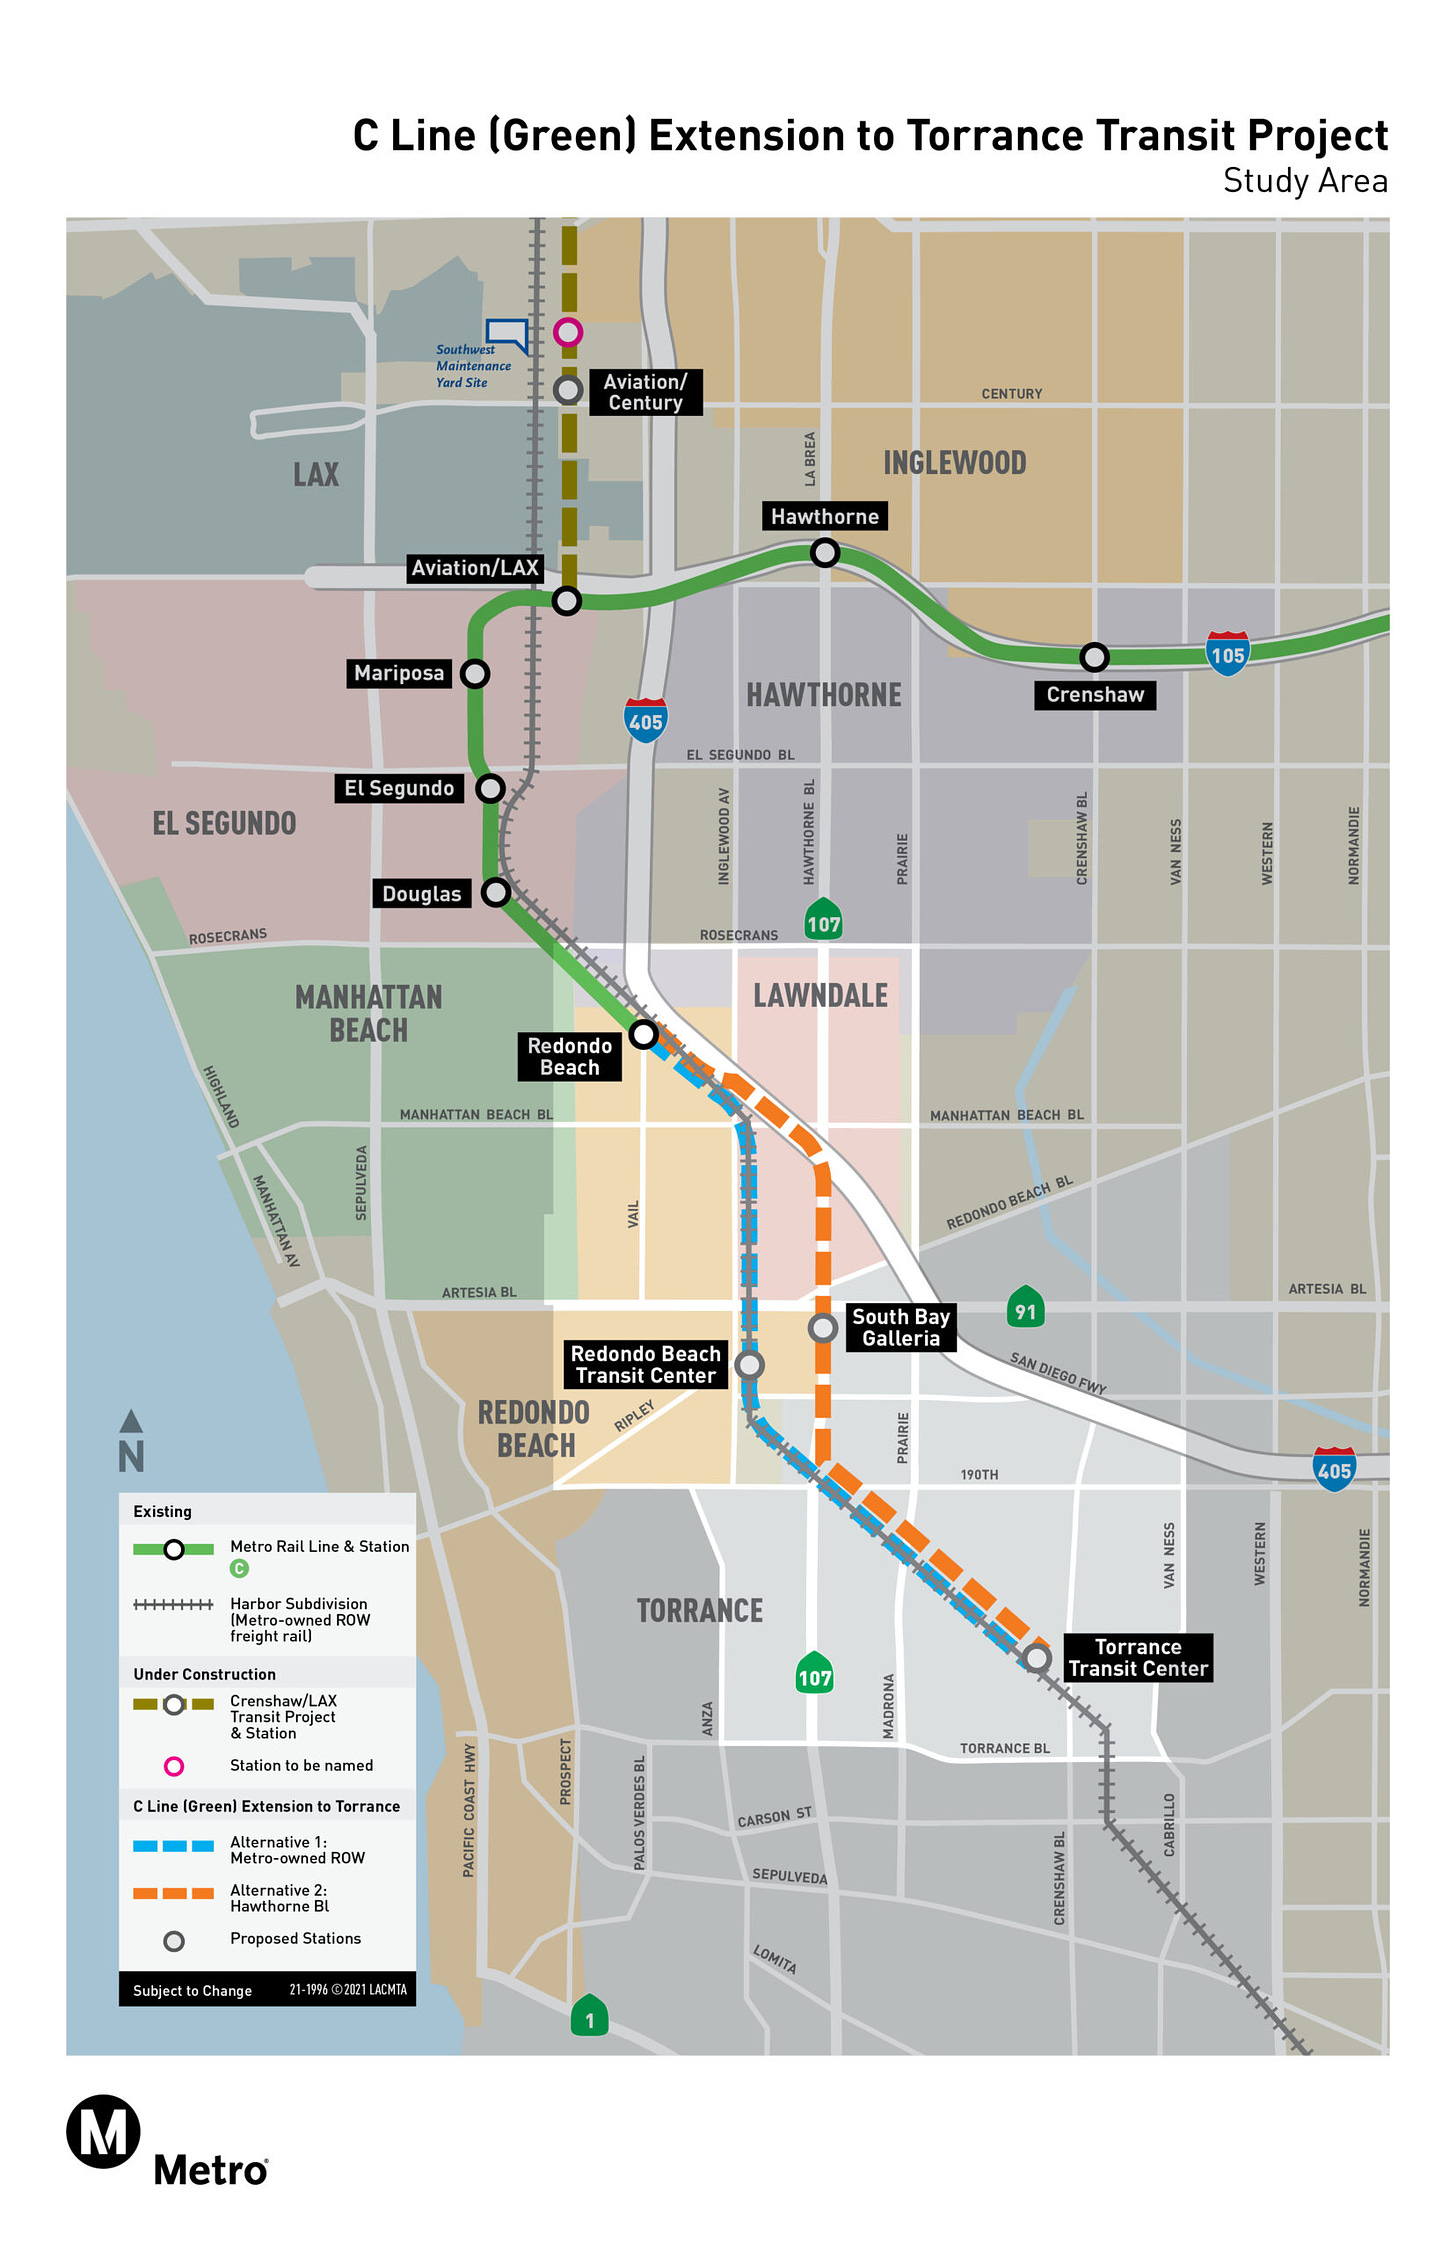 C Line (Green) Extension to Torrance Project Map